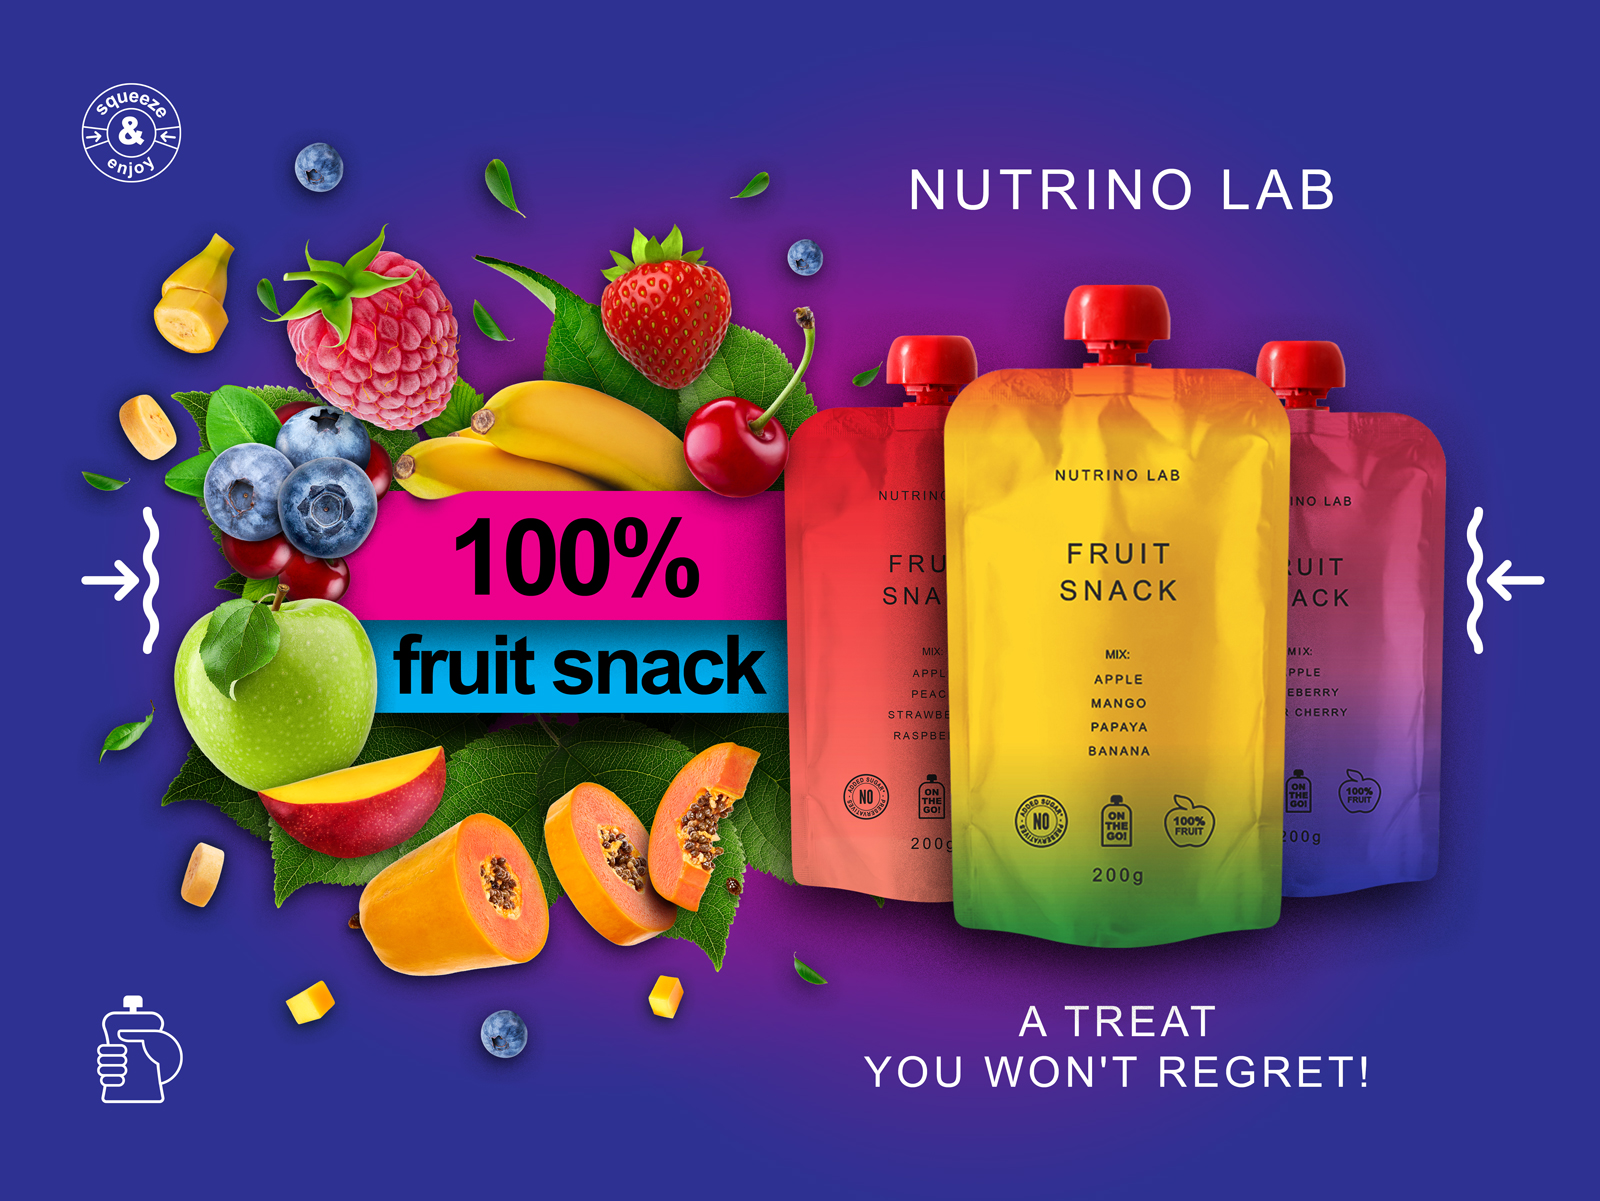 Visit Nutrino Lab at IFE from 20 - 22 March 2023